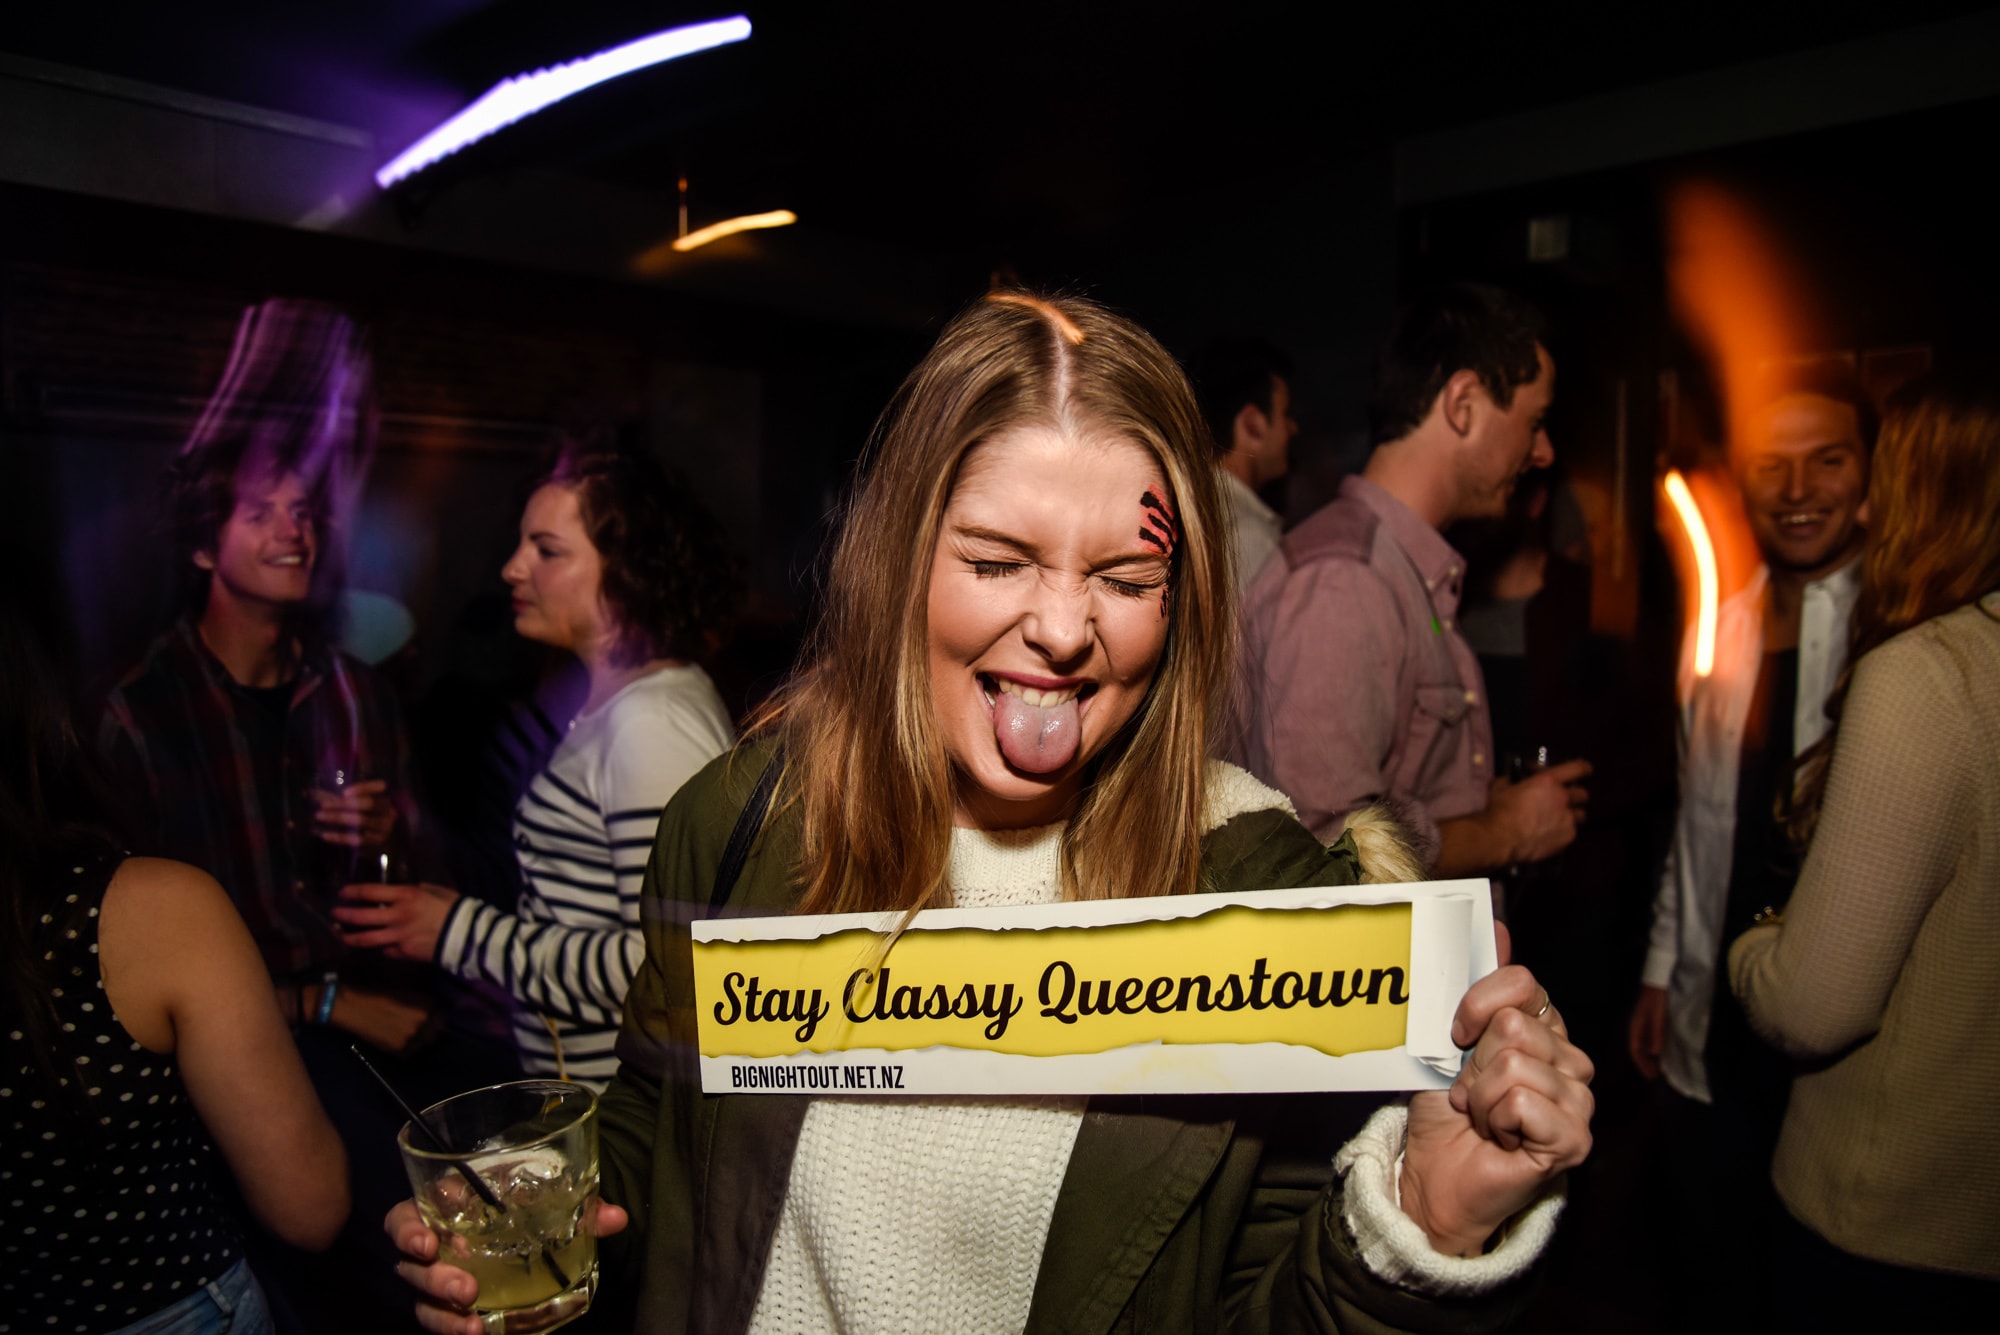 Girl sticking out her tongue having fun on the big night out pub crawl in Queenstown with stay classy Queenstown sign